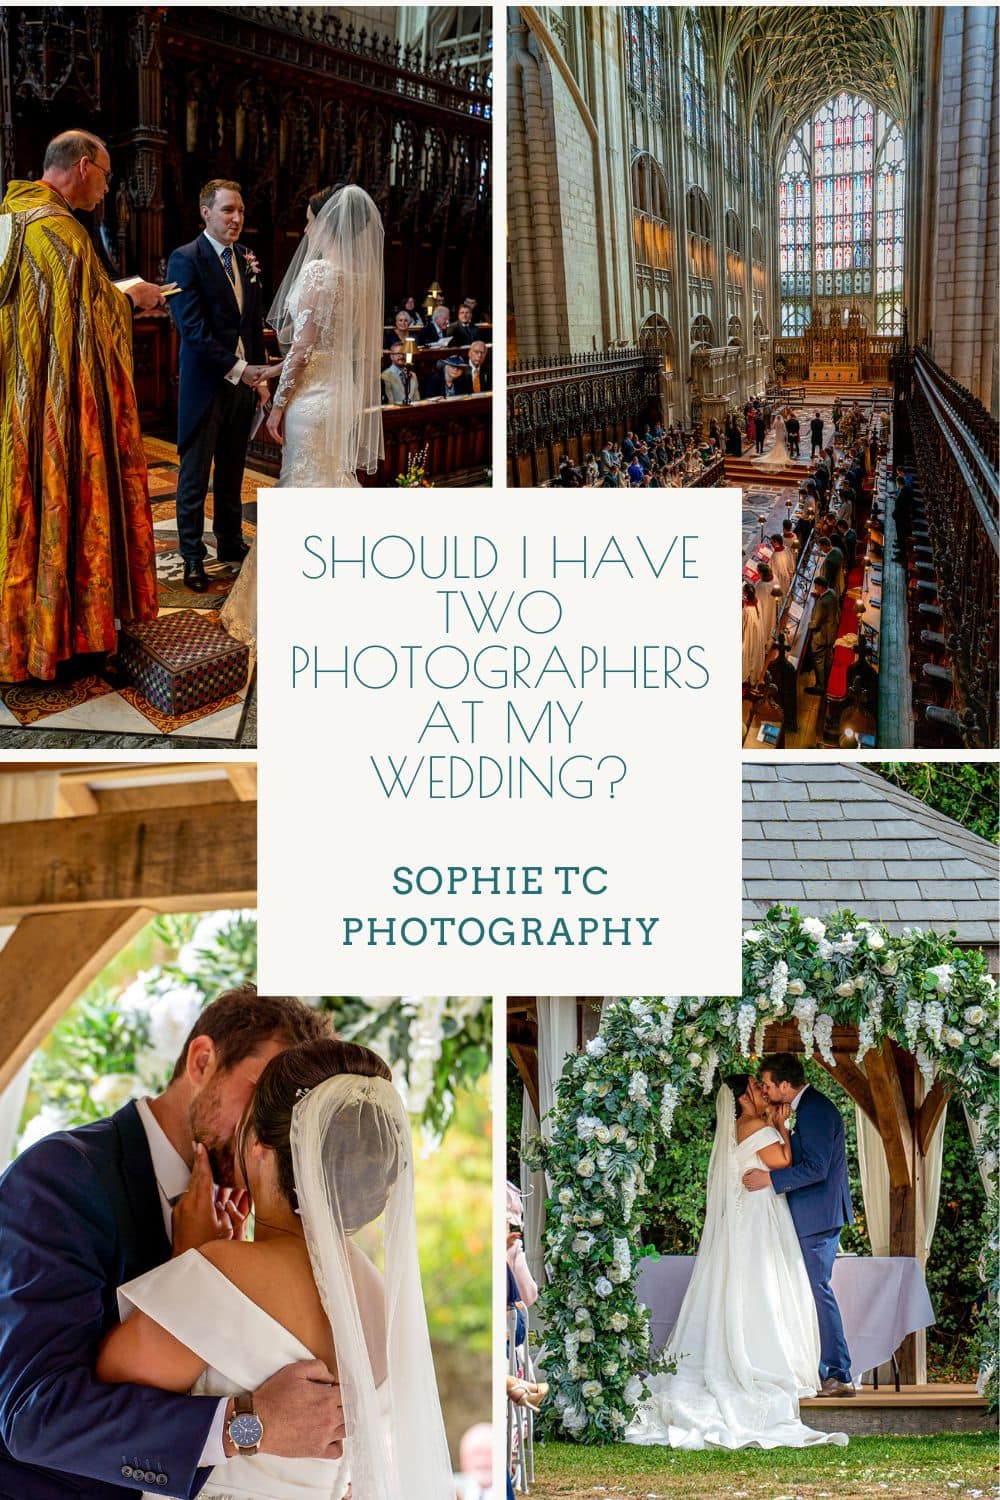 Should I have two Photographers at my Wedding?